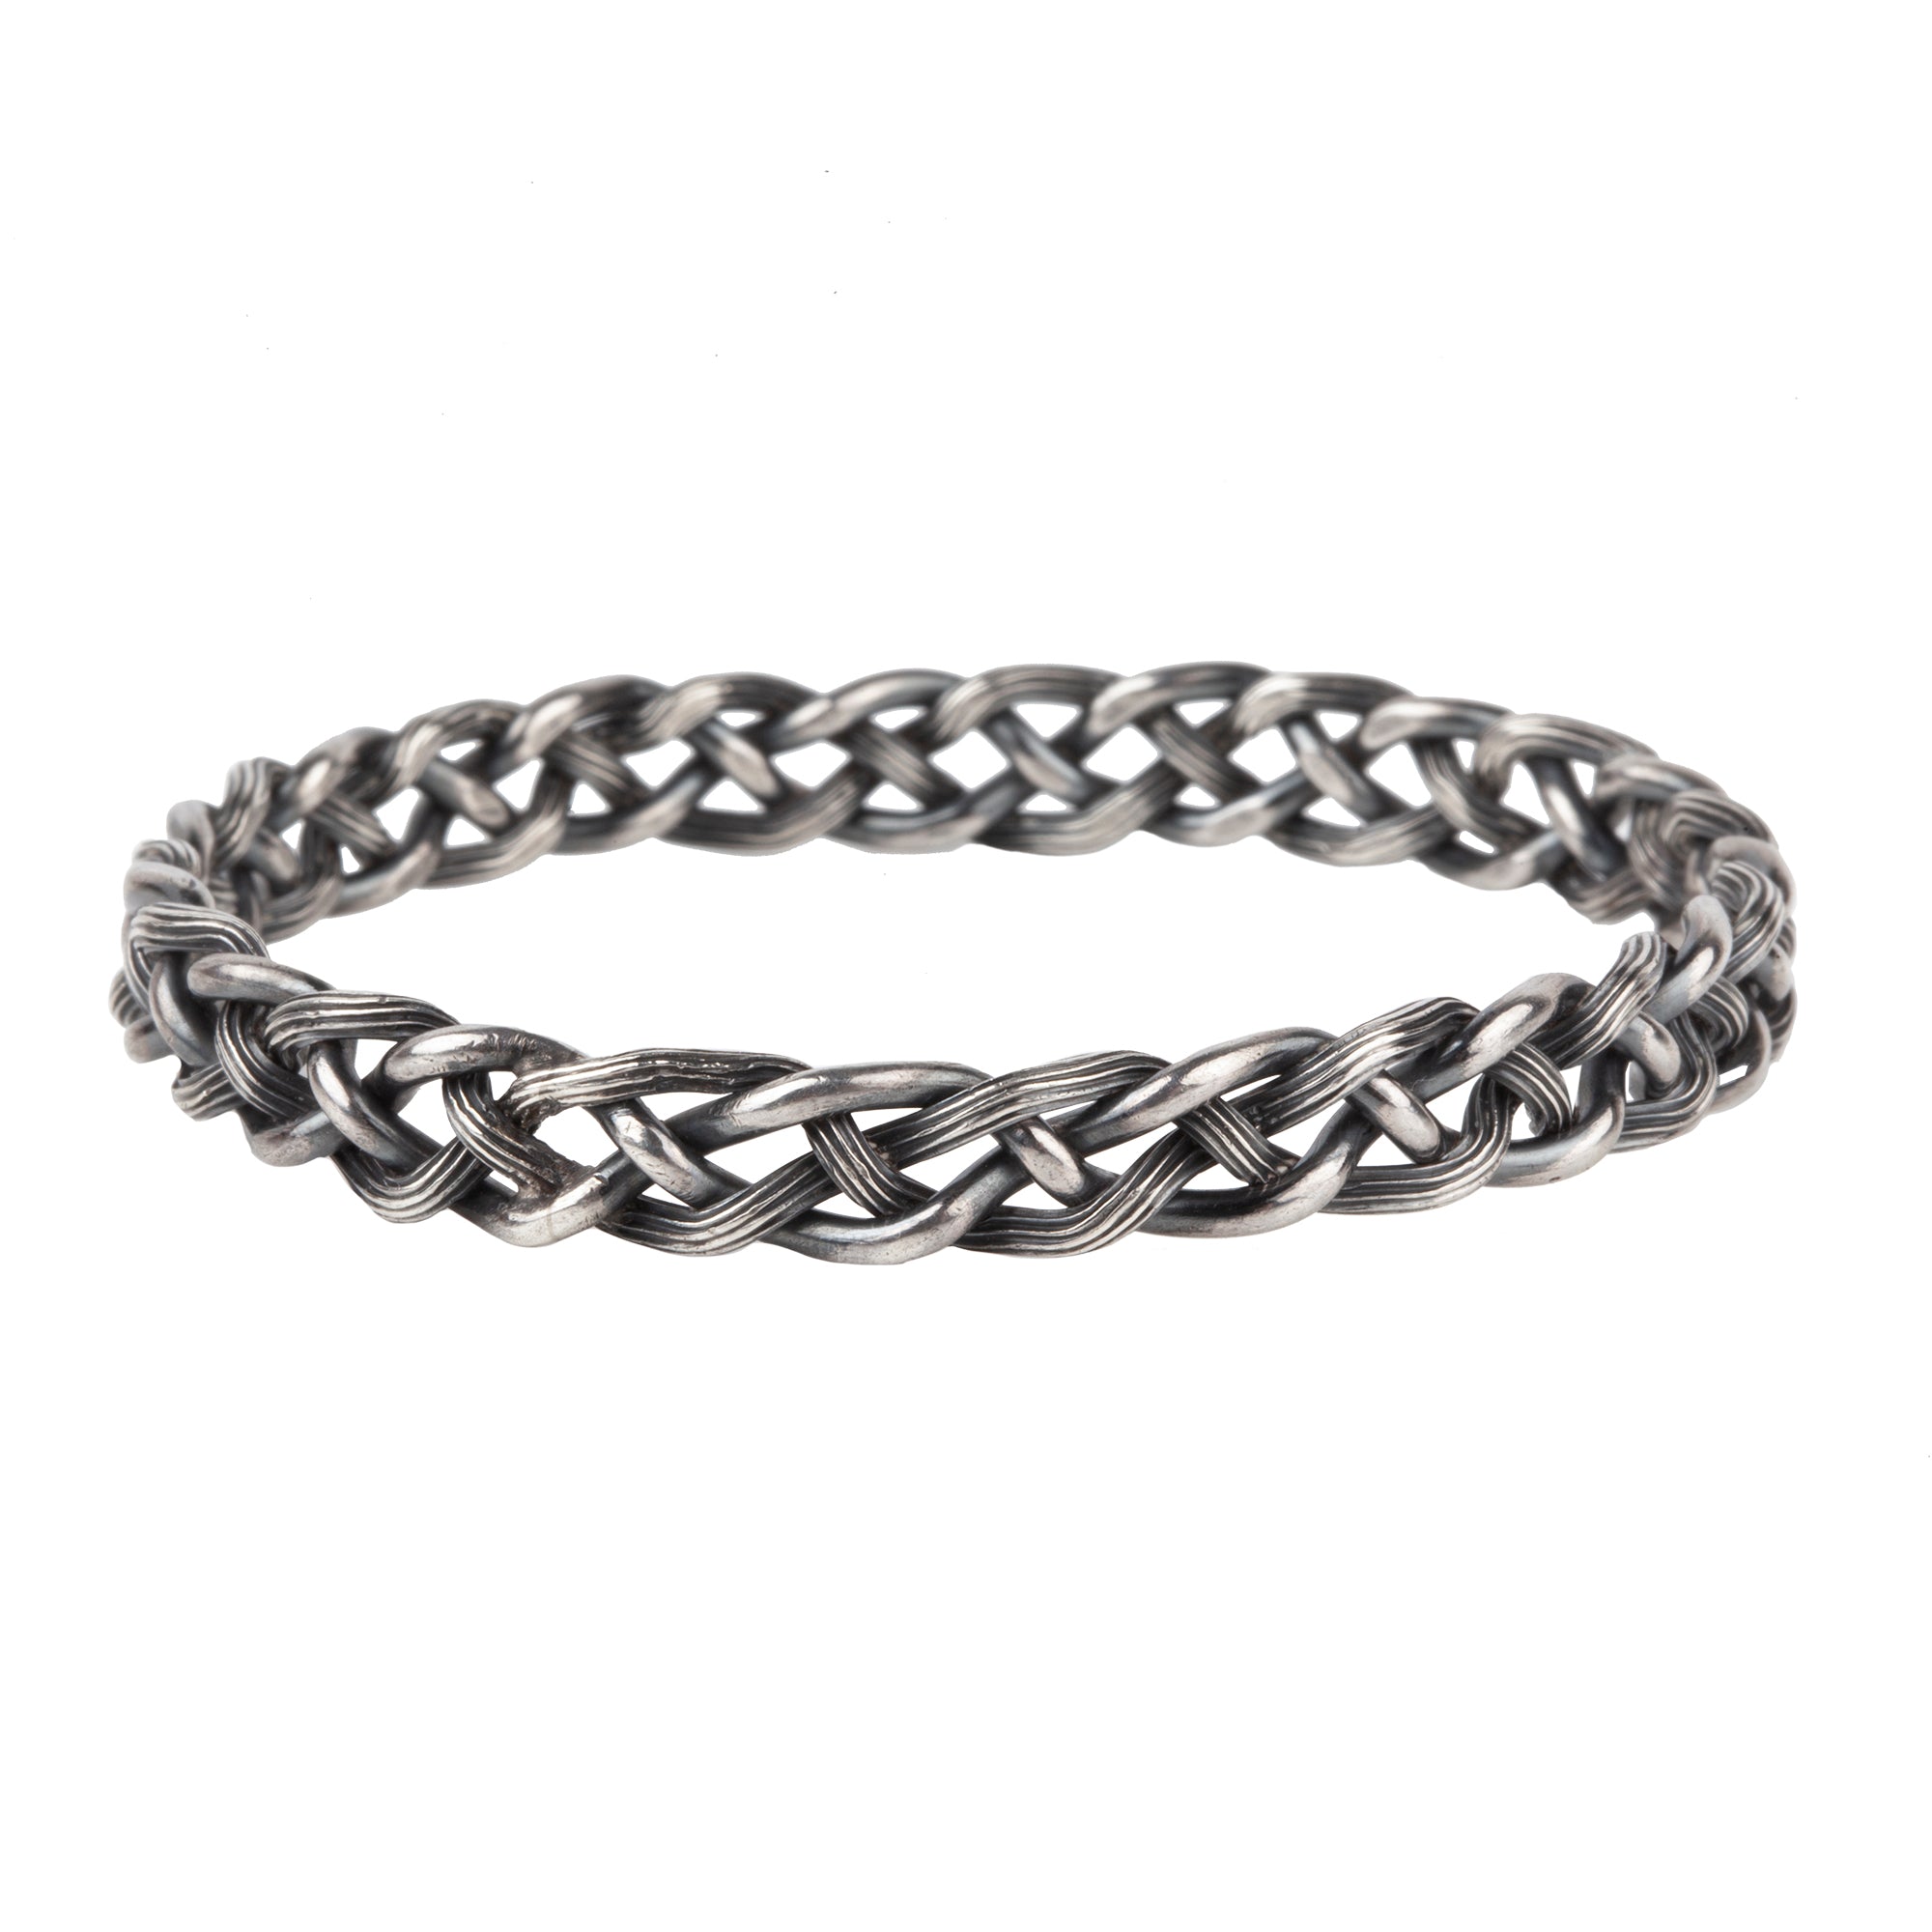 Victorian braided sterling silver bangle